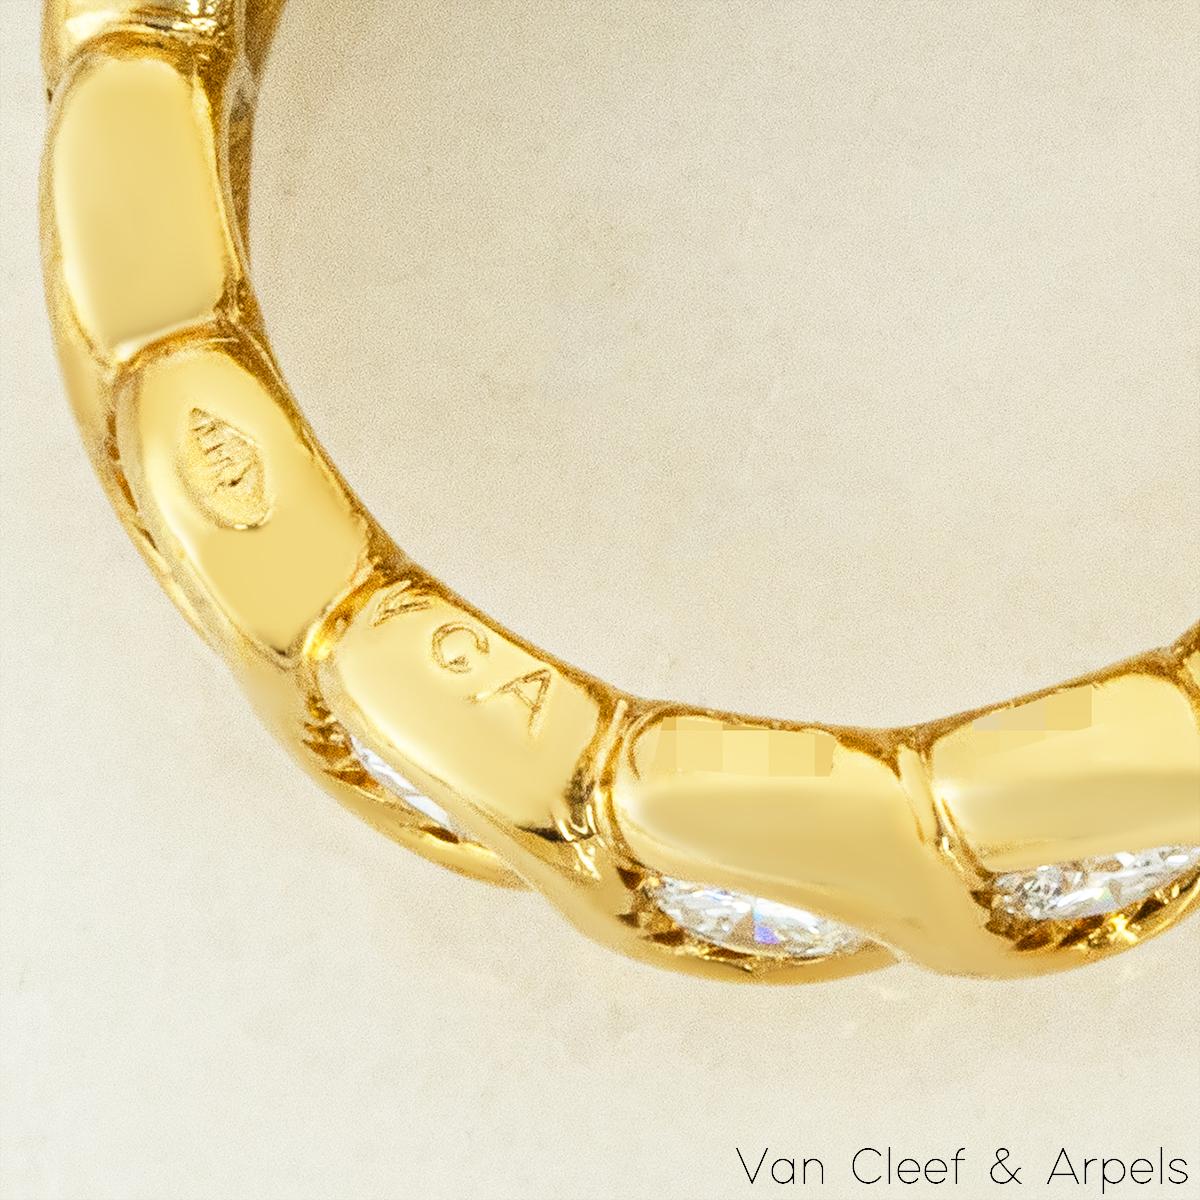 Van Cleef & Arpels Yellow Gold Diamond Eternity Wedding Band Ring 1.40 Cts In Excellent Condition For Sale In London, GB